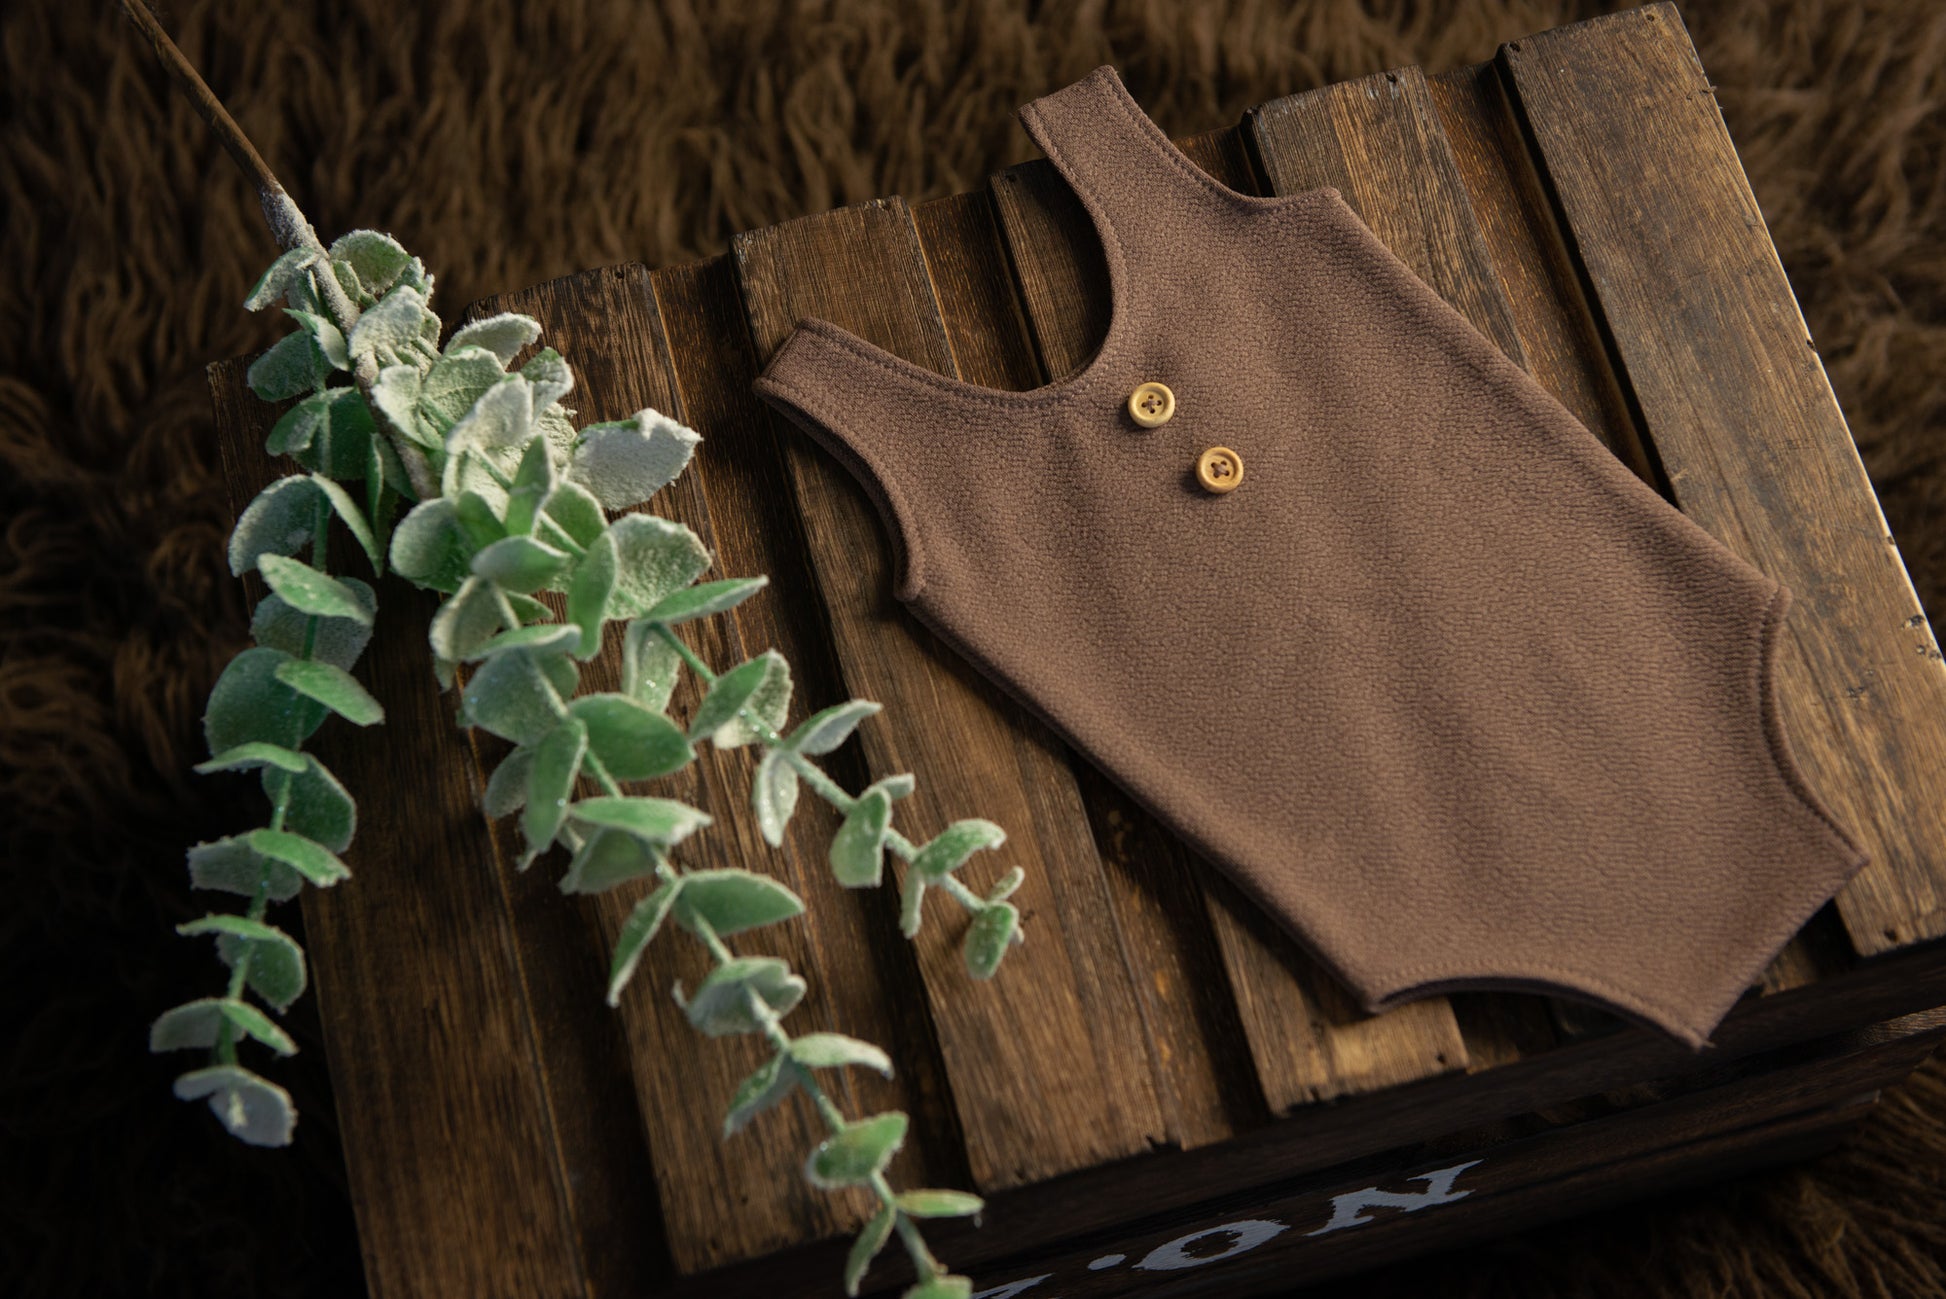 Lovely handmade sleeveless romper perfect for any newborn session. Made with our signature and best-selling textured fabric. Faux buttons come down the front to give the look an added bonus. Stretchy enough to fit newborns 0-14 days old. 